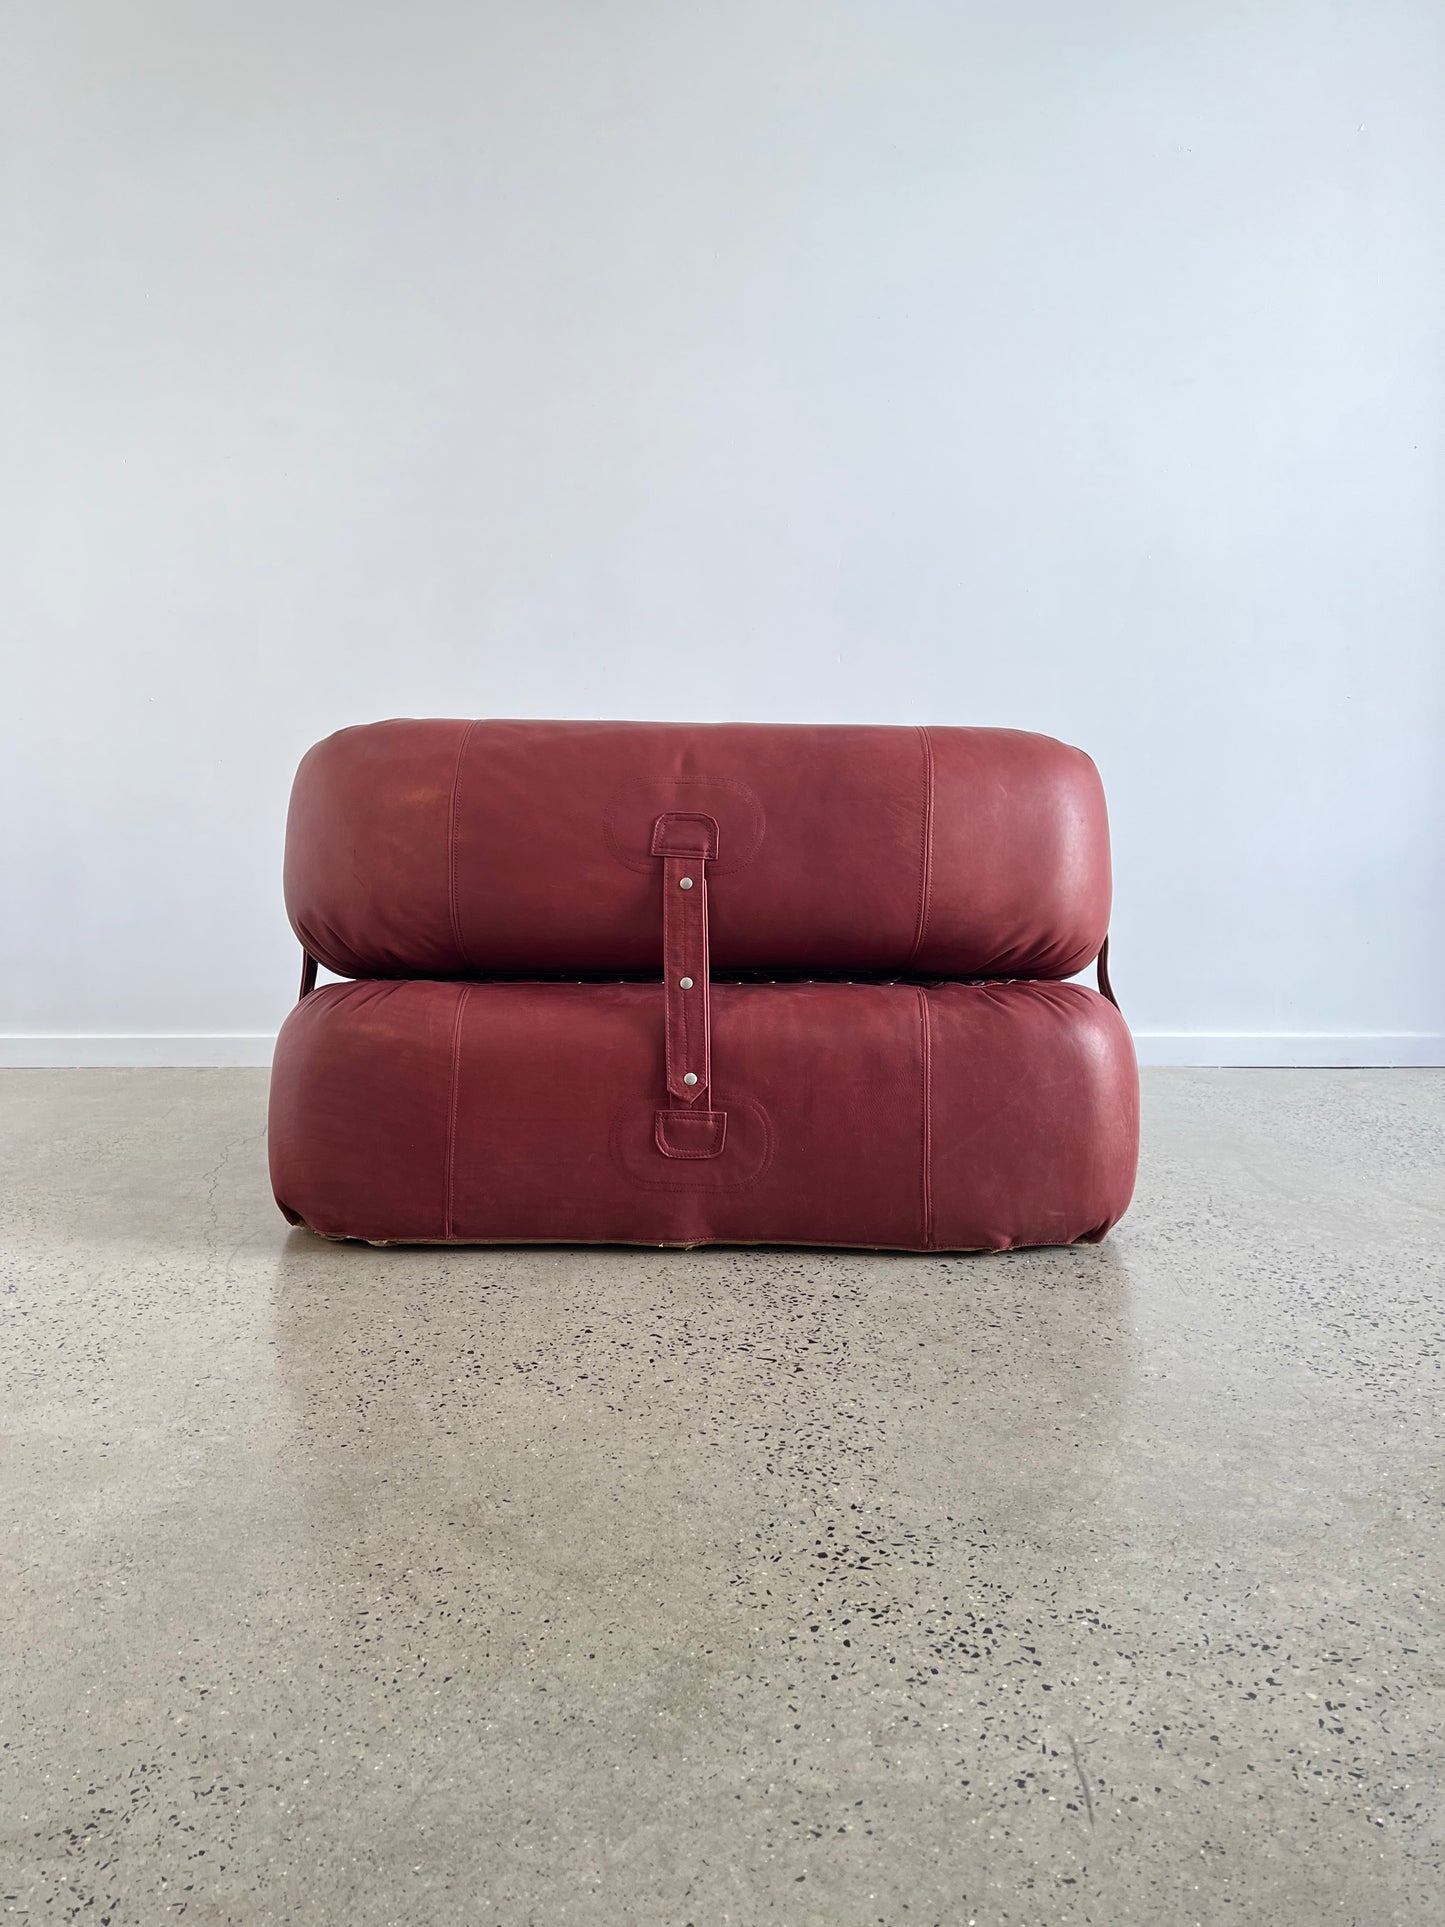 “Anfibio” by Alessandro Becchi for Givannetti, Armchair in Brown Leather and Sheepskin, 1970